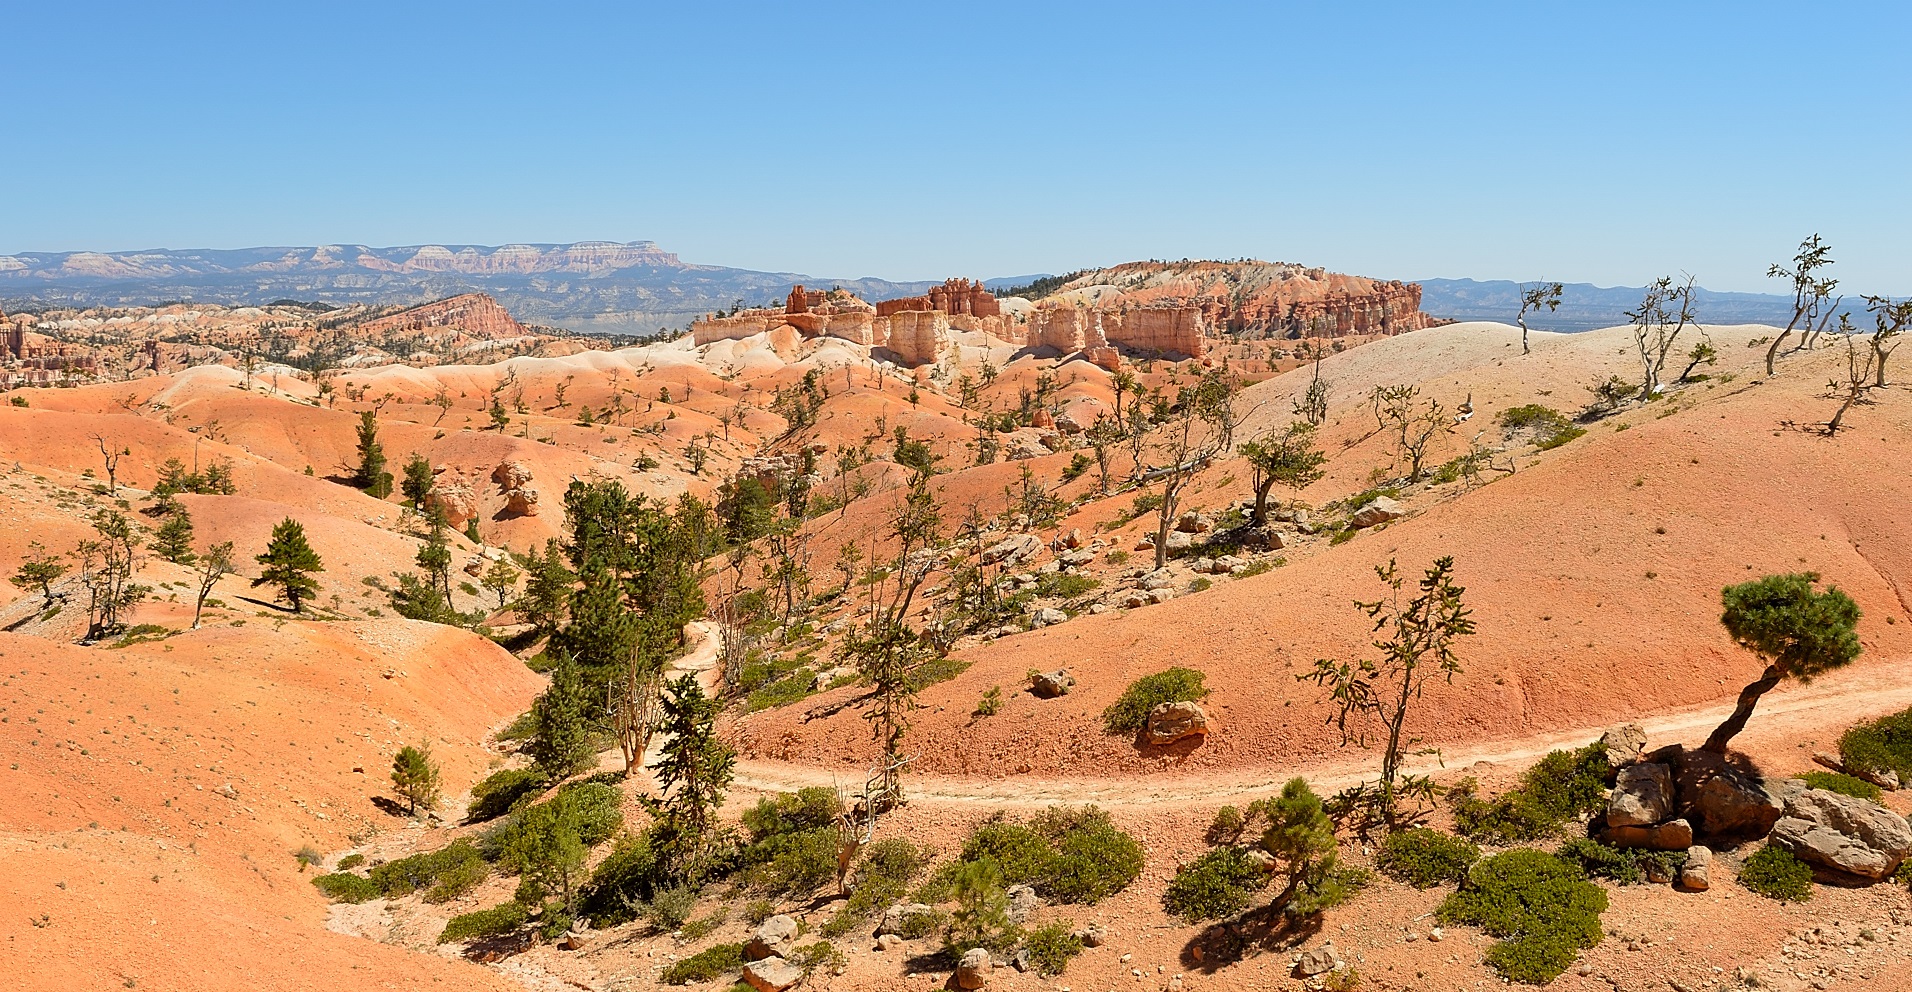 Who Else Wants To Feel The Magic Of Bryce Canyon?